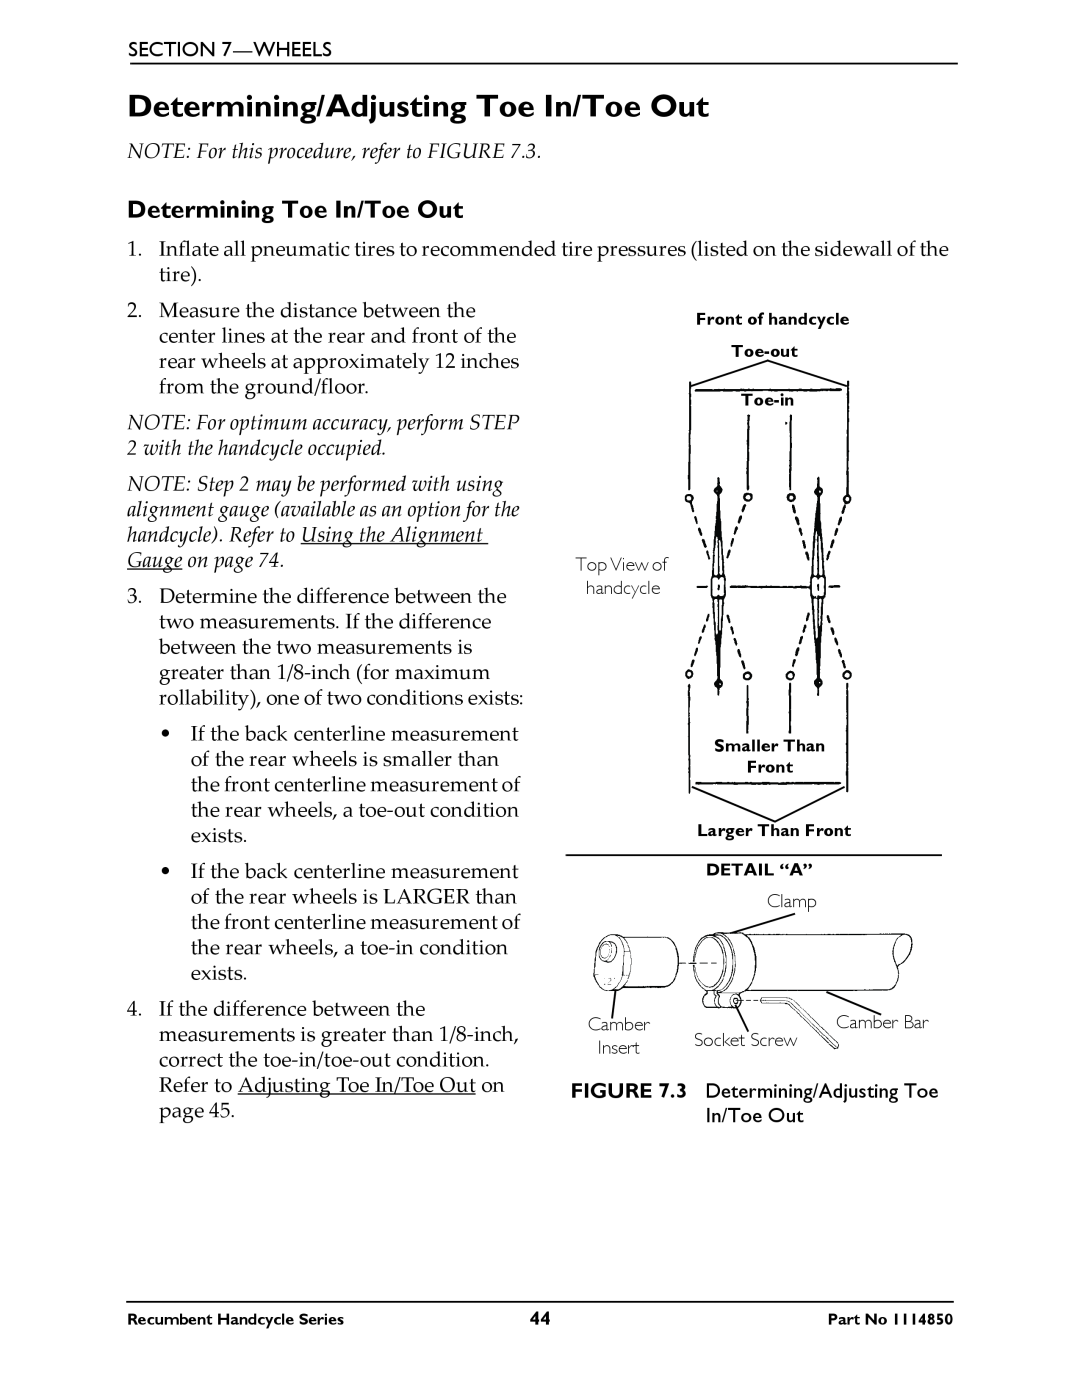 Invacare Force Determining/Adjusting Toe In/Toe Out, Determining Toe In/Toe Out, NOTE For this procedure, refer to FIGURE 